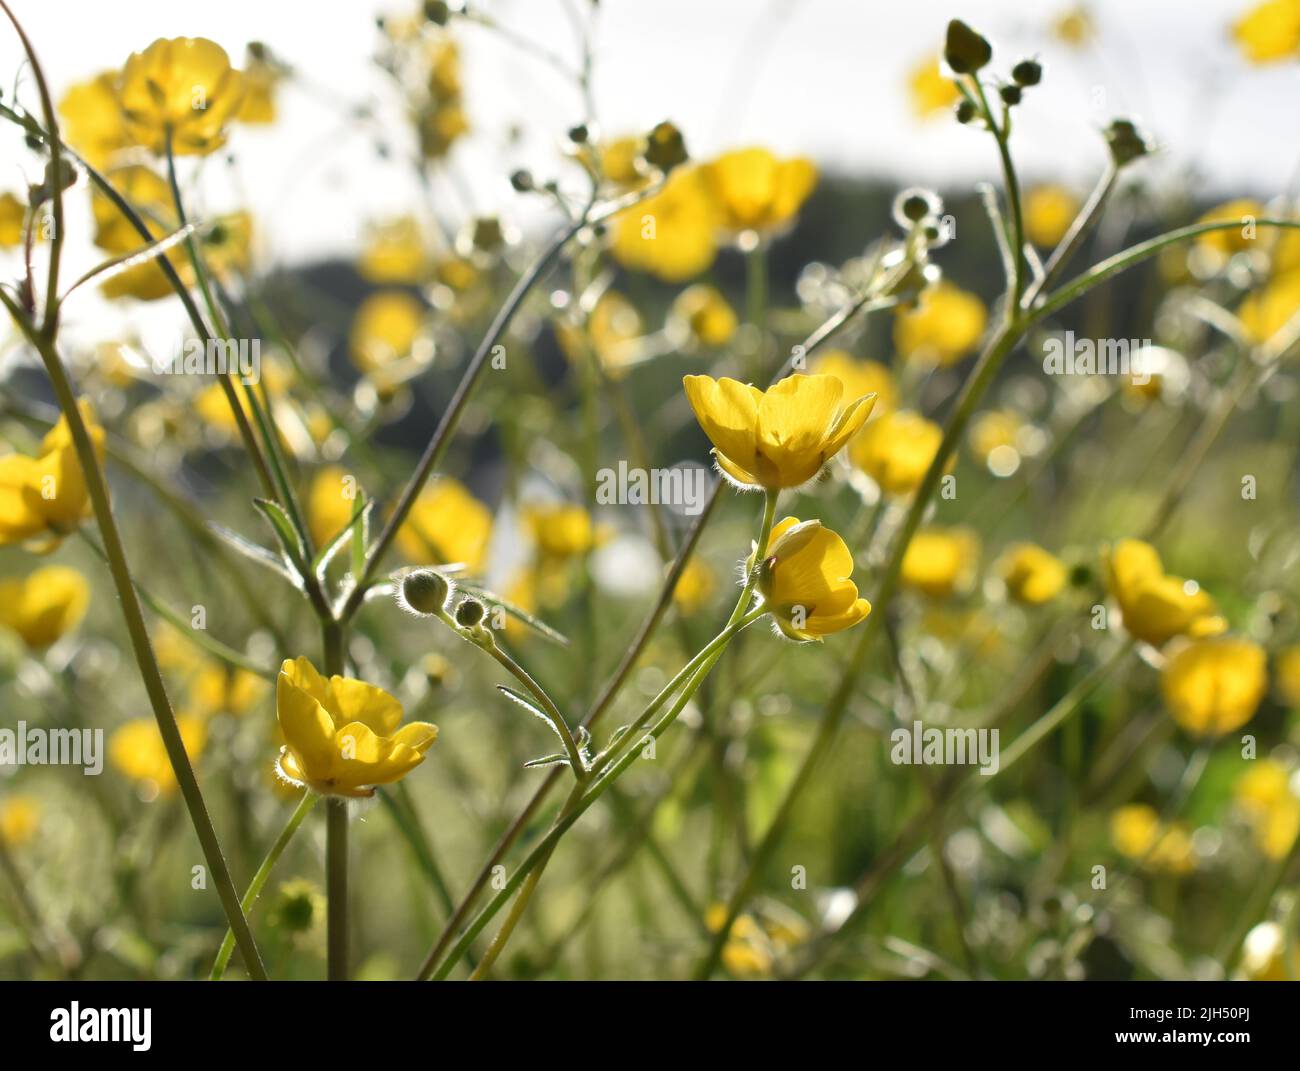 Ranunculus acris common buttercup plant flowering in summer Stock Photo